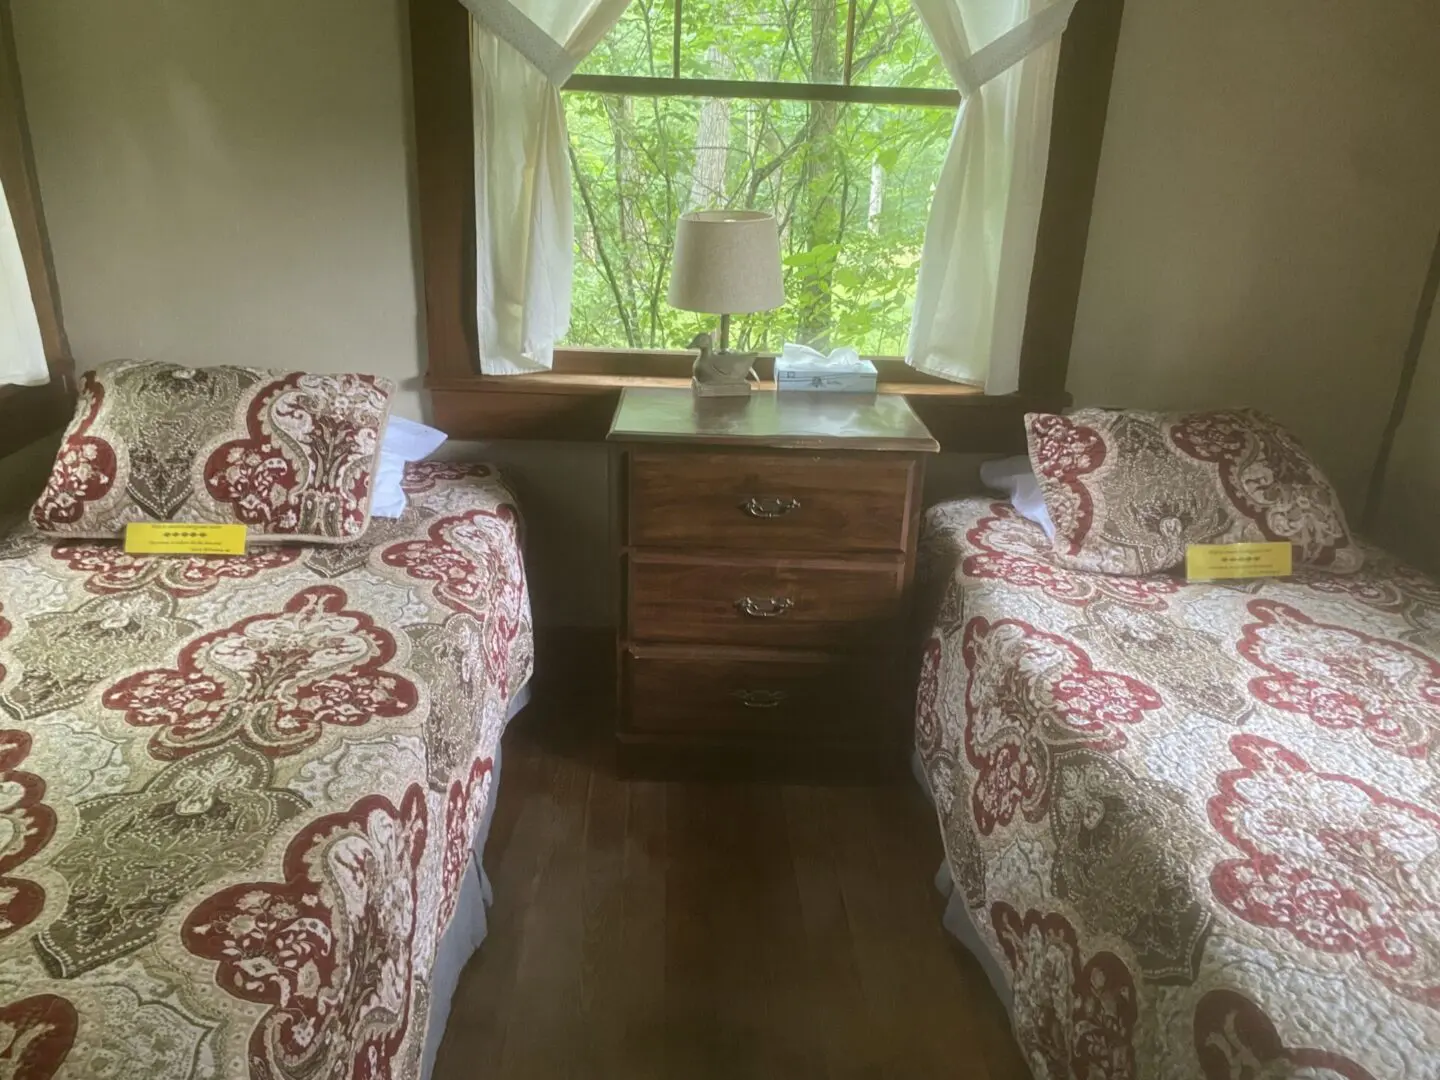 A bedroom with two beds and a dresser in the corner.